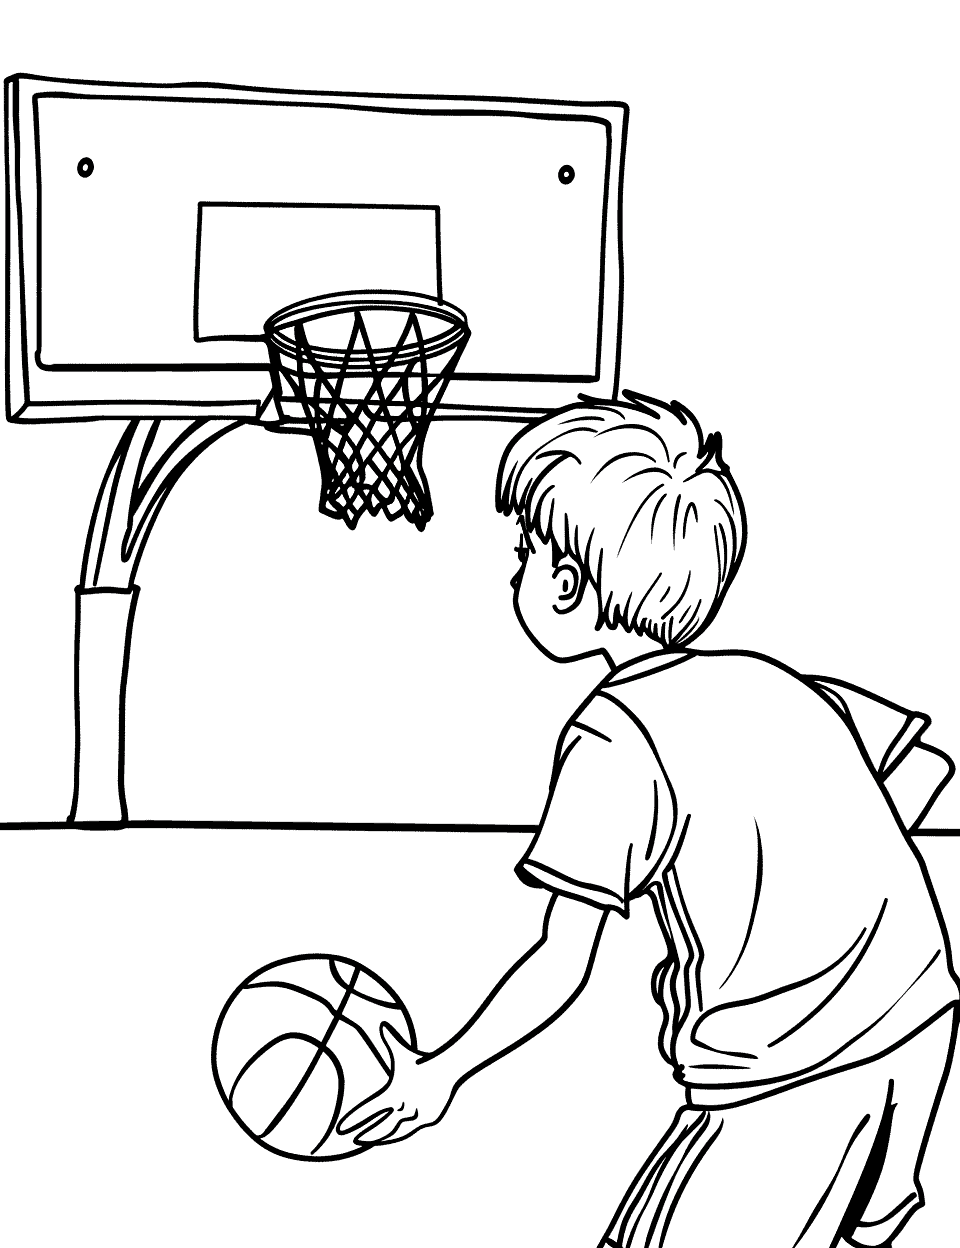 Basketball Free Throw Sports Coloring Page - A young player focusing on making a free throw, with the basketball hoop in the background.